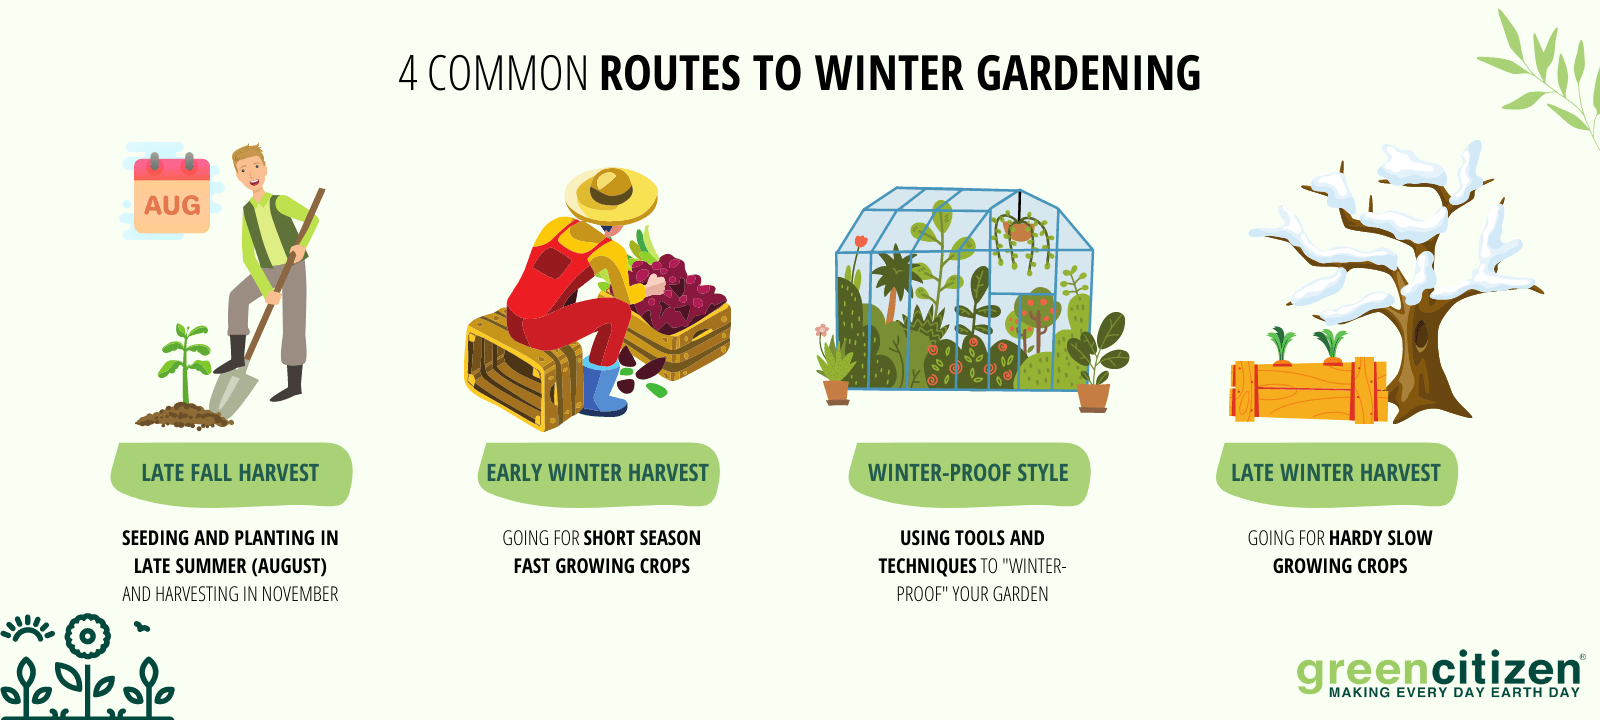 Routes to Winter Gardening